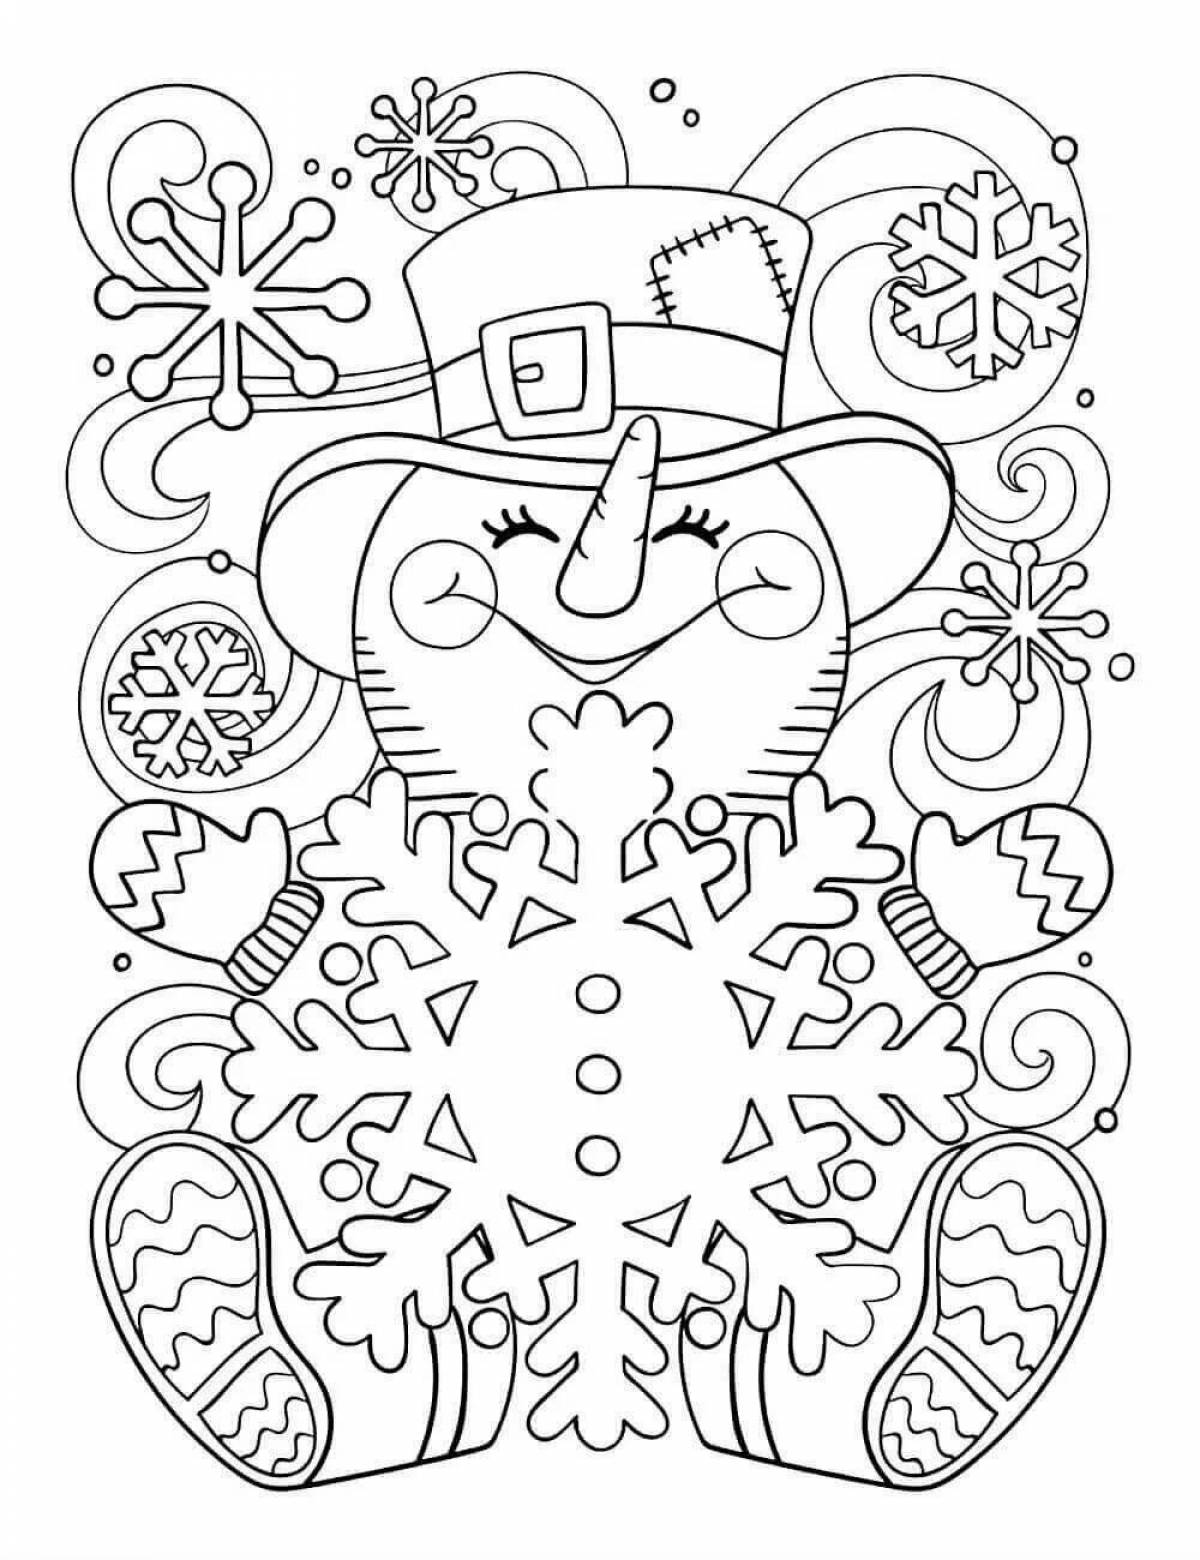 Violent winter anti-stress coloring book for kids